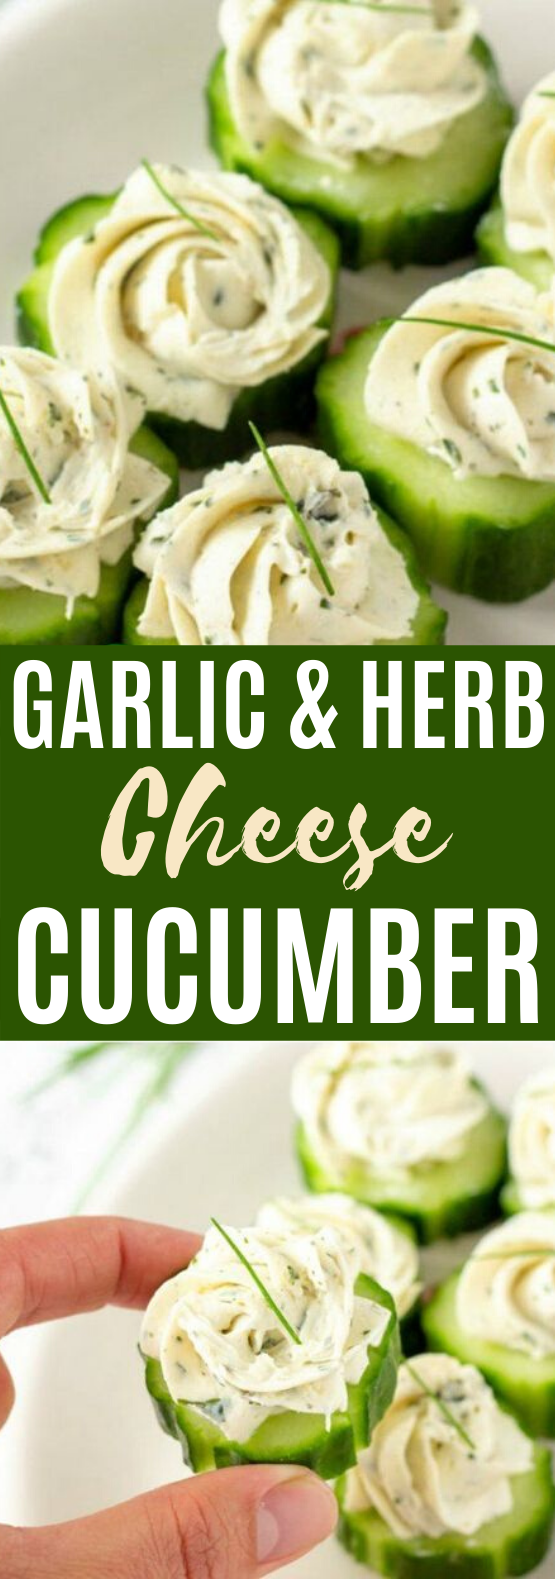 Cucumber Slices With Herb & Garlic Cheese #keto #snacks #appetizers #lowcarb #recipes